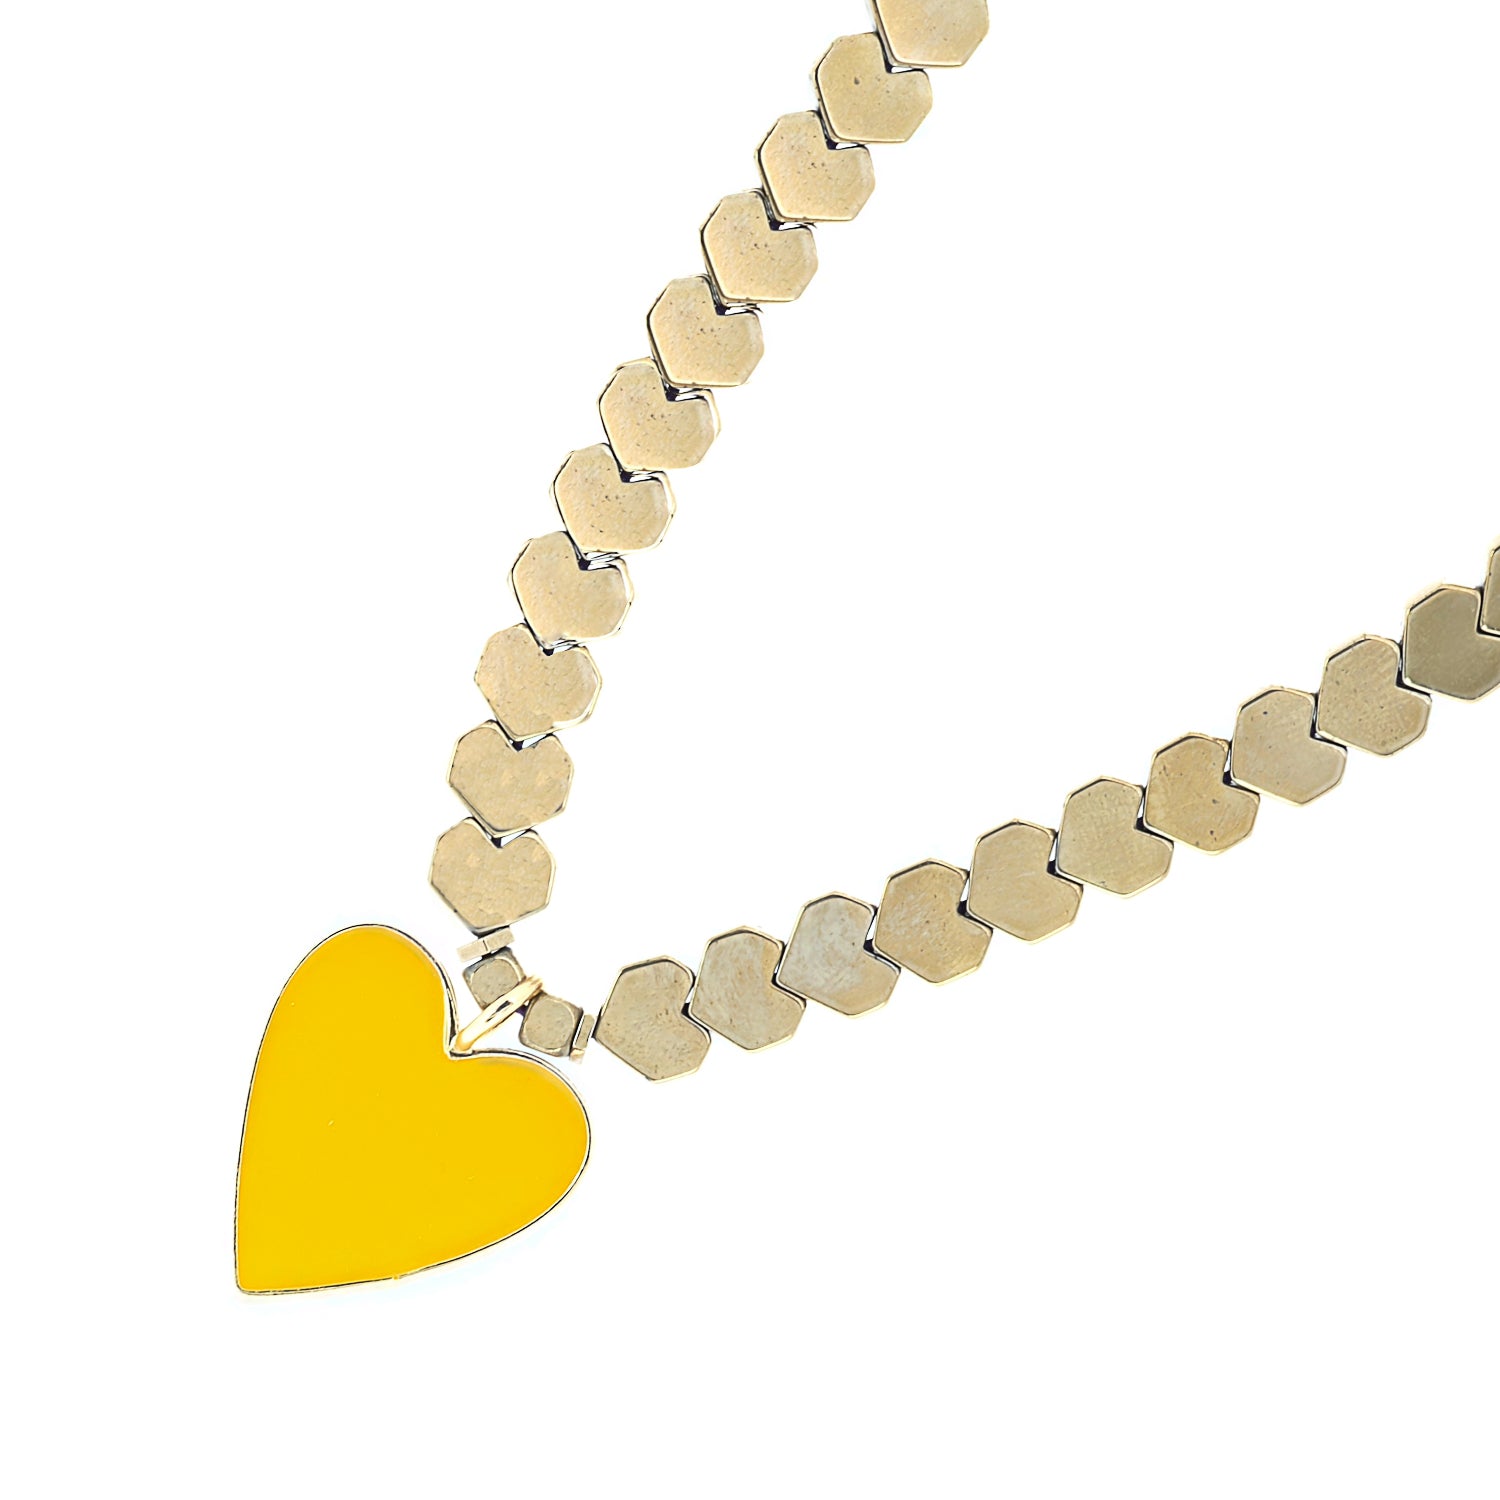 Golden Hue of Sunshine - The pendant's golden hue represents warmth and optimism.